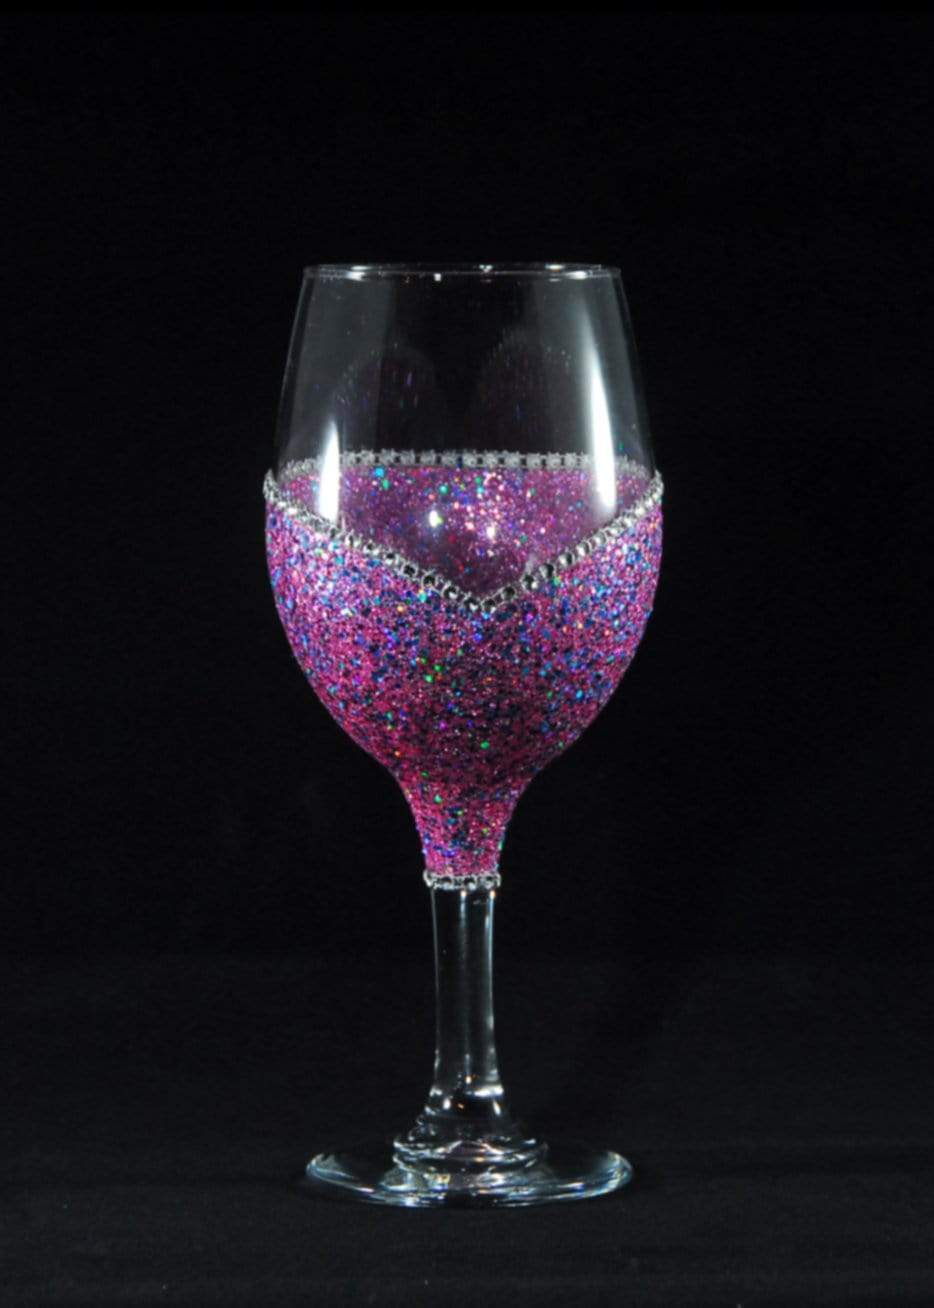 Drinkware Unicorn-New Color / Stem Cleveland Indians Bling Stem or Stemless Wine Glasses-Choose your color WineyBitchesCo